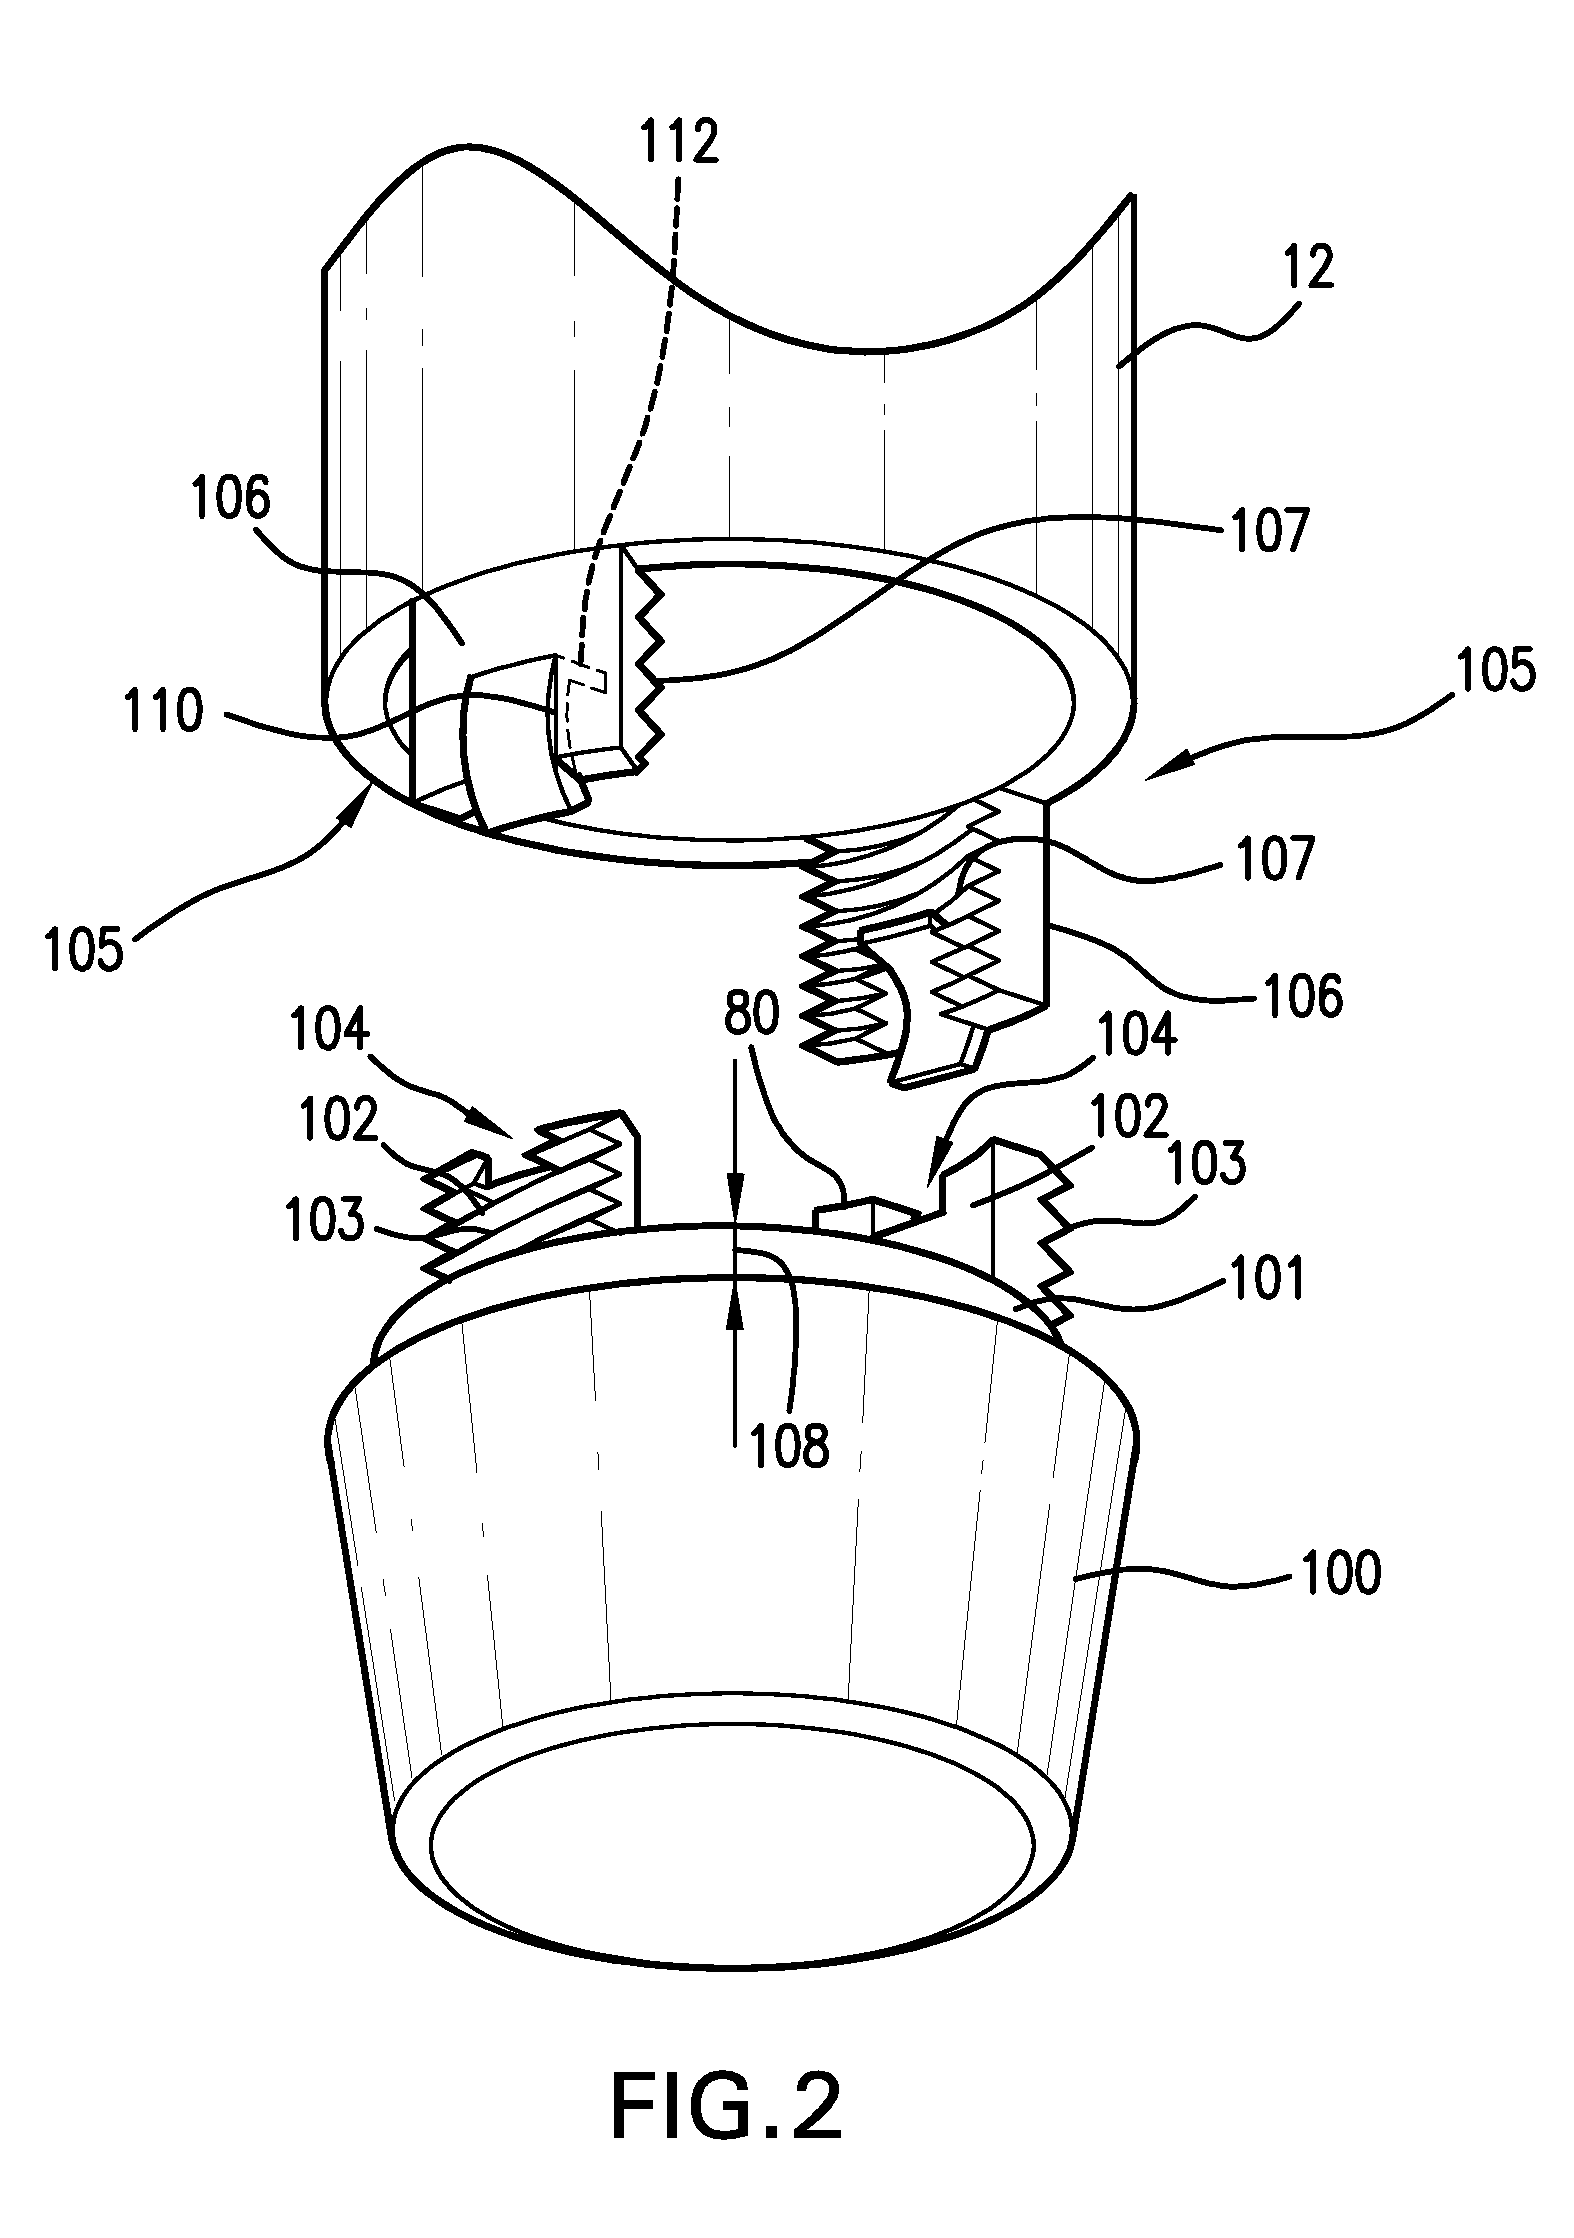 Two-stage reconstituting injector